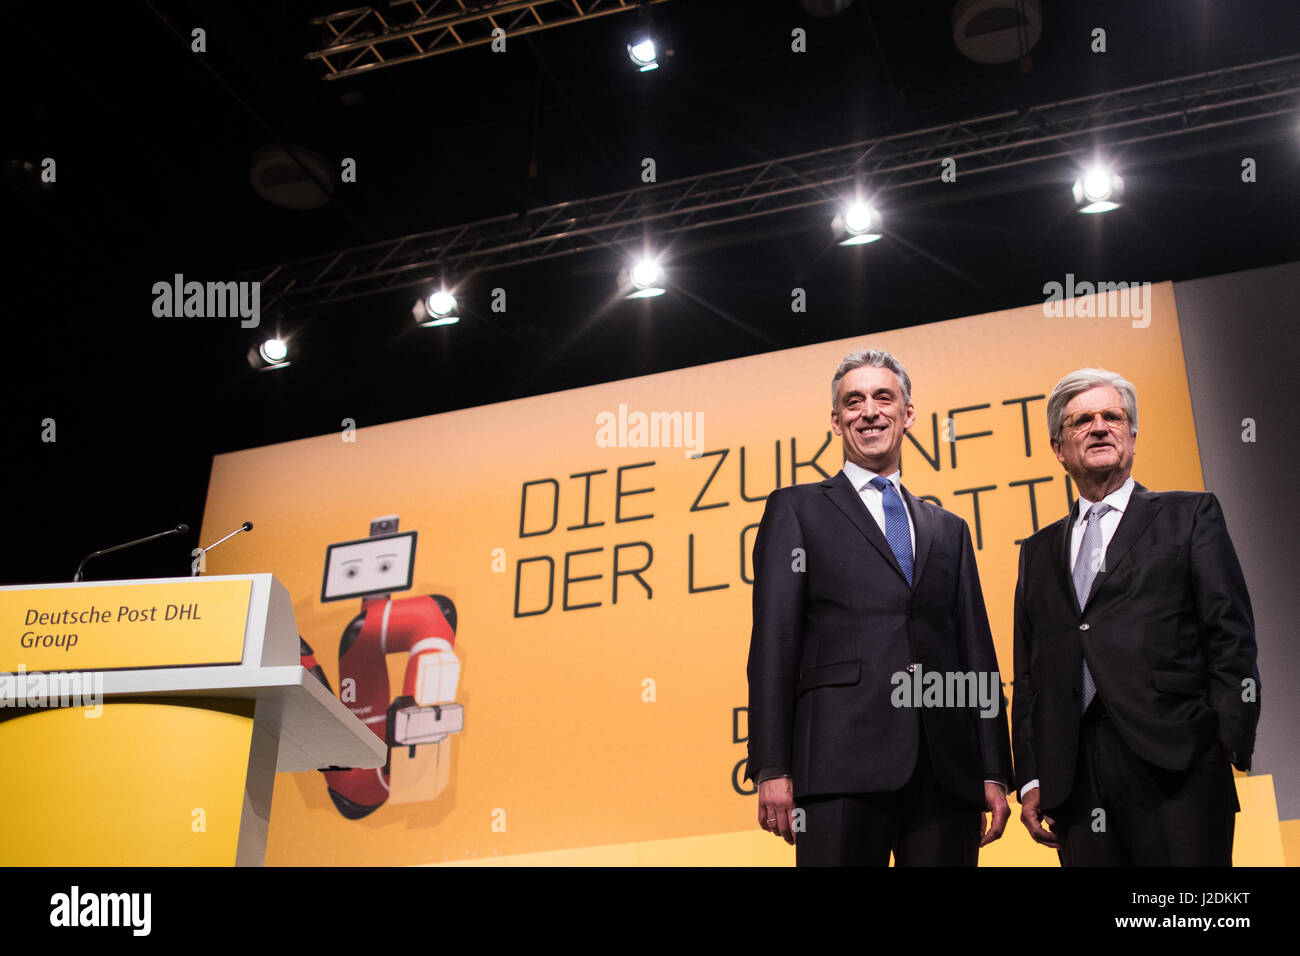 Bochum, Germany. 28th Apr, 2017. Frank Appel (R), the CEO of Deutsche Post AG, with chairman of the board of directors Wulf von Schimmelmann at the company's general meeting in Bochum, Germany, 28 April 2017. Appel presented the company's financial report. Photo: Marcel Kusch/dpa/Alamy Live News Stock Photo